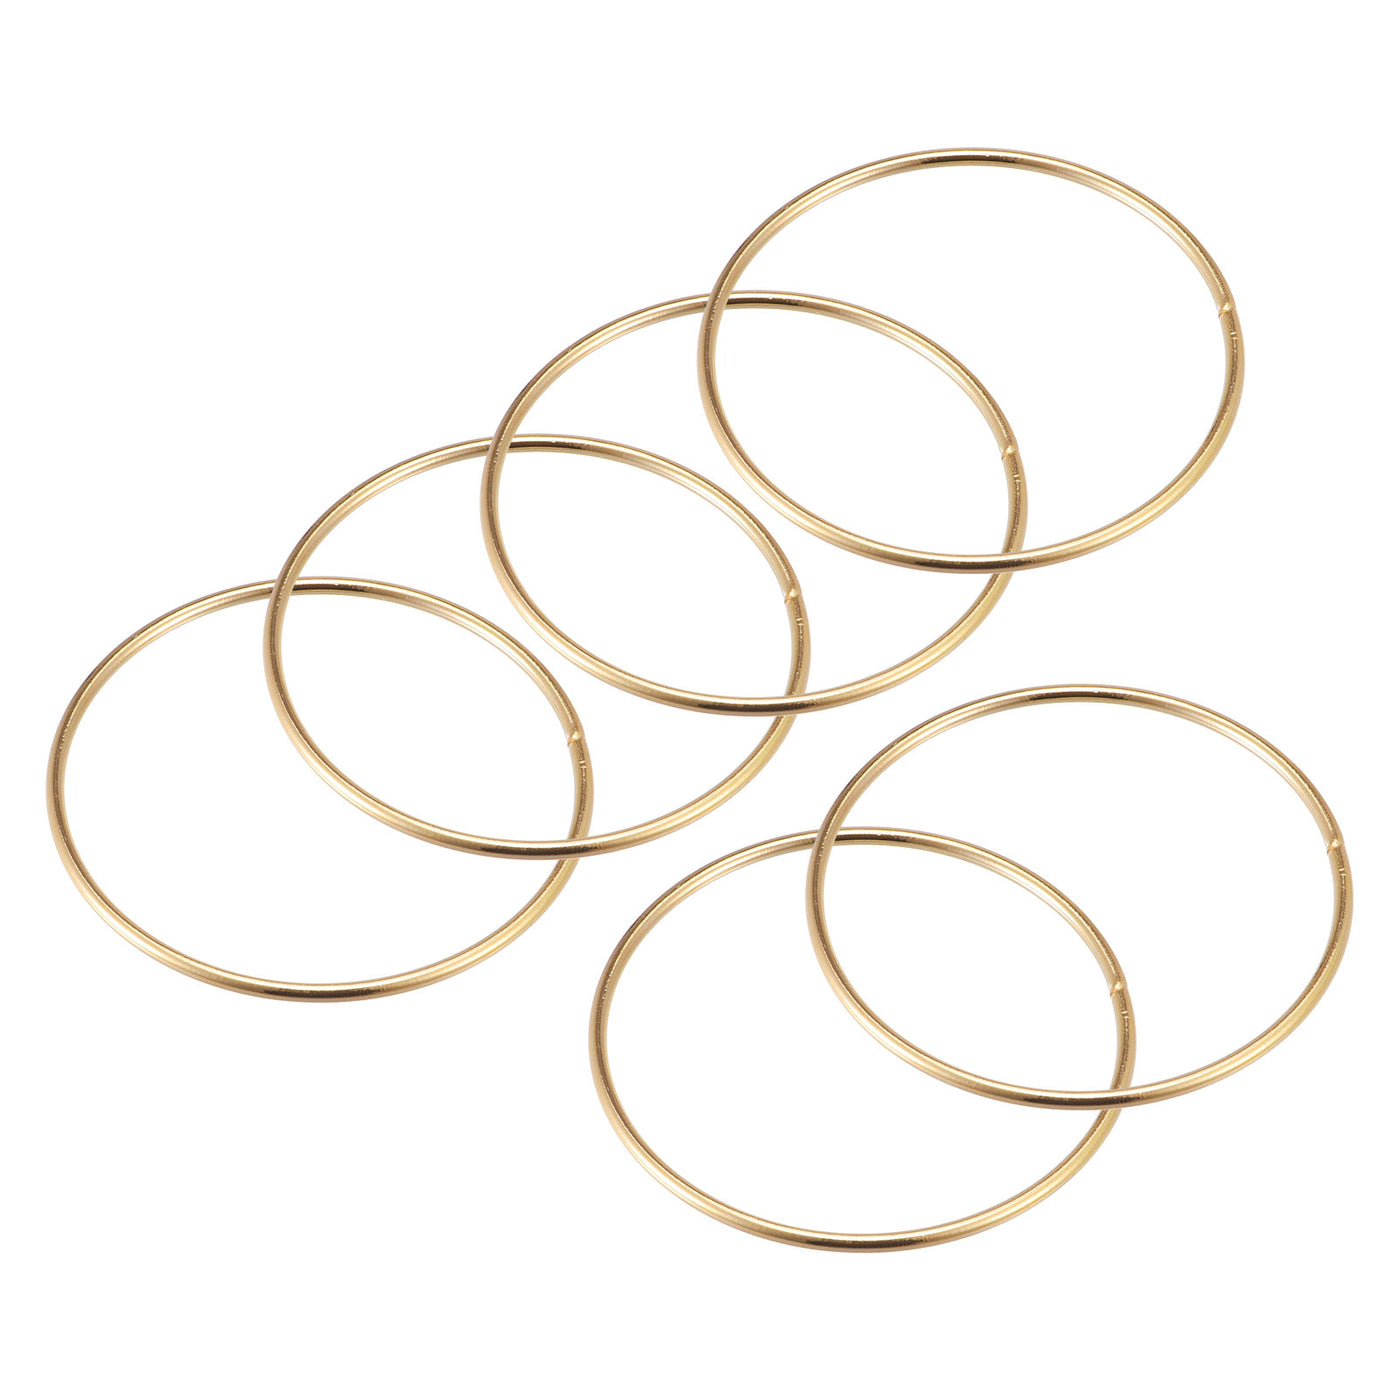 uxcell Uxcell 75mm(2.95") OD Metal O Ring Non-Welded Craft Hoops for DIY Gold Tone 12pcs